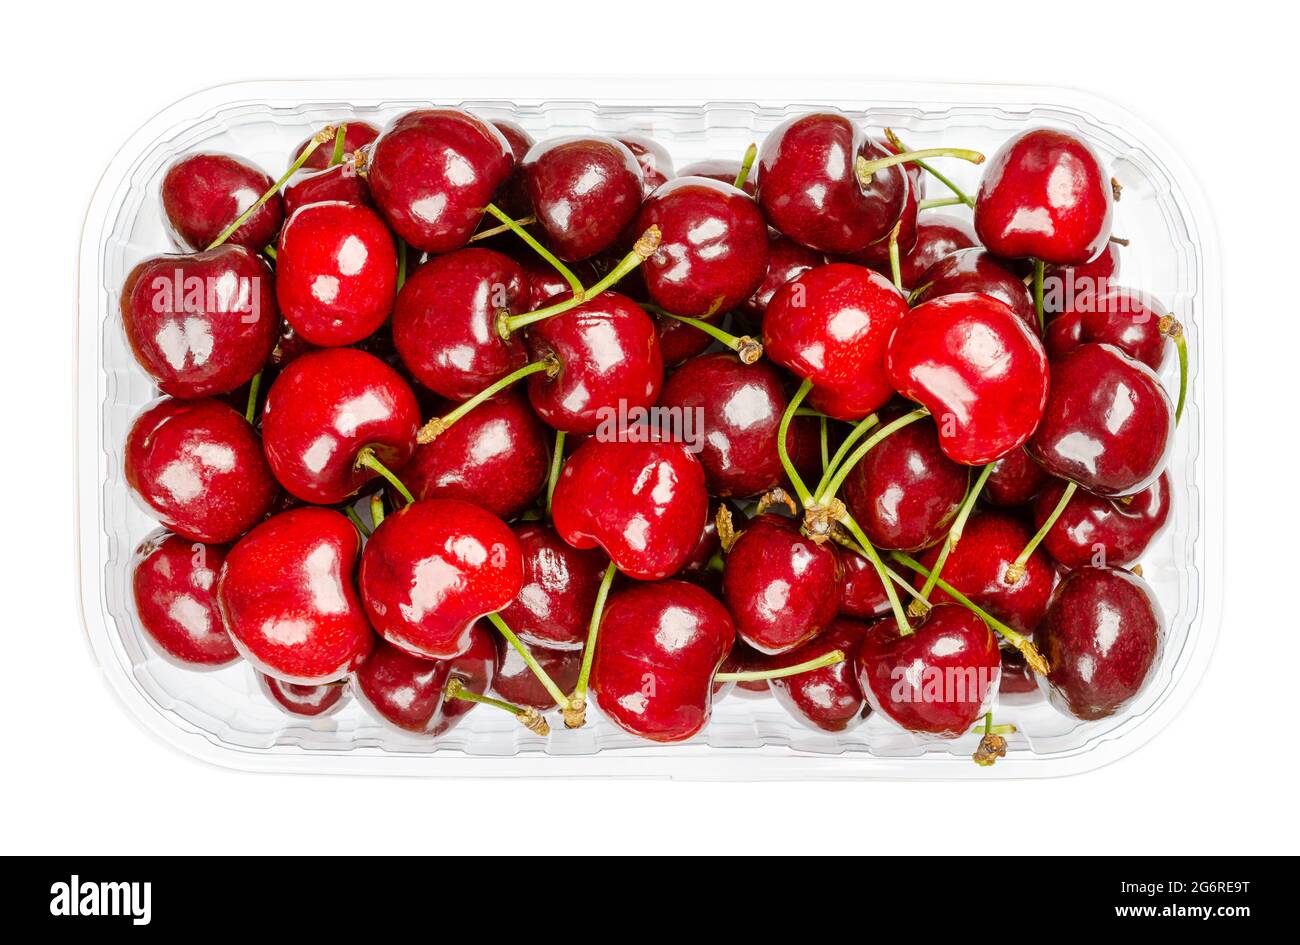 Fresh cherries in a plastic container. Ready to eat, red and ripe fruits of the true cherry species Prunus avium, a stone fruit cultivar. Close-up. Stock Photo